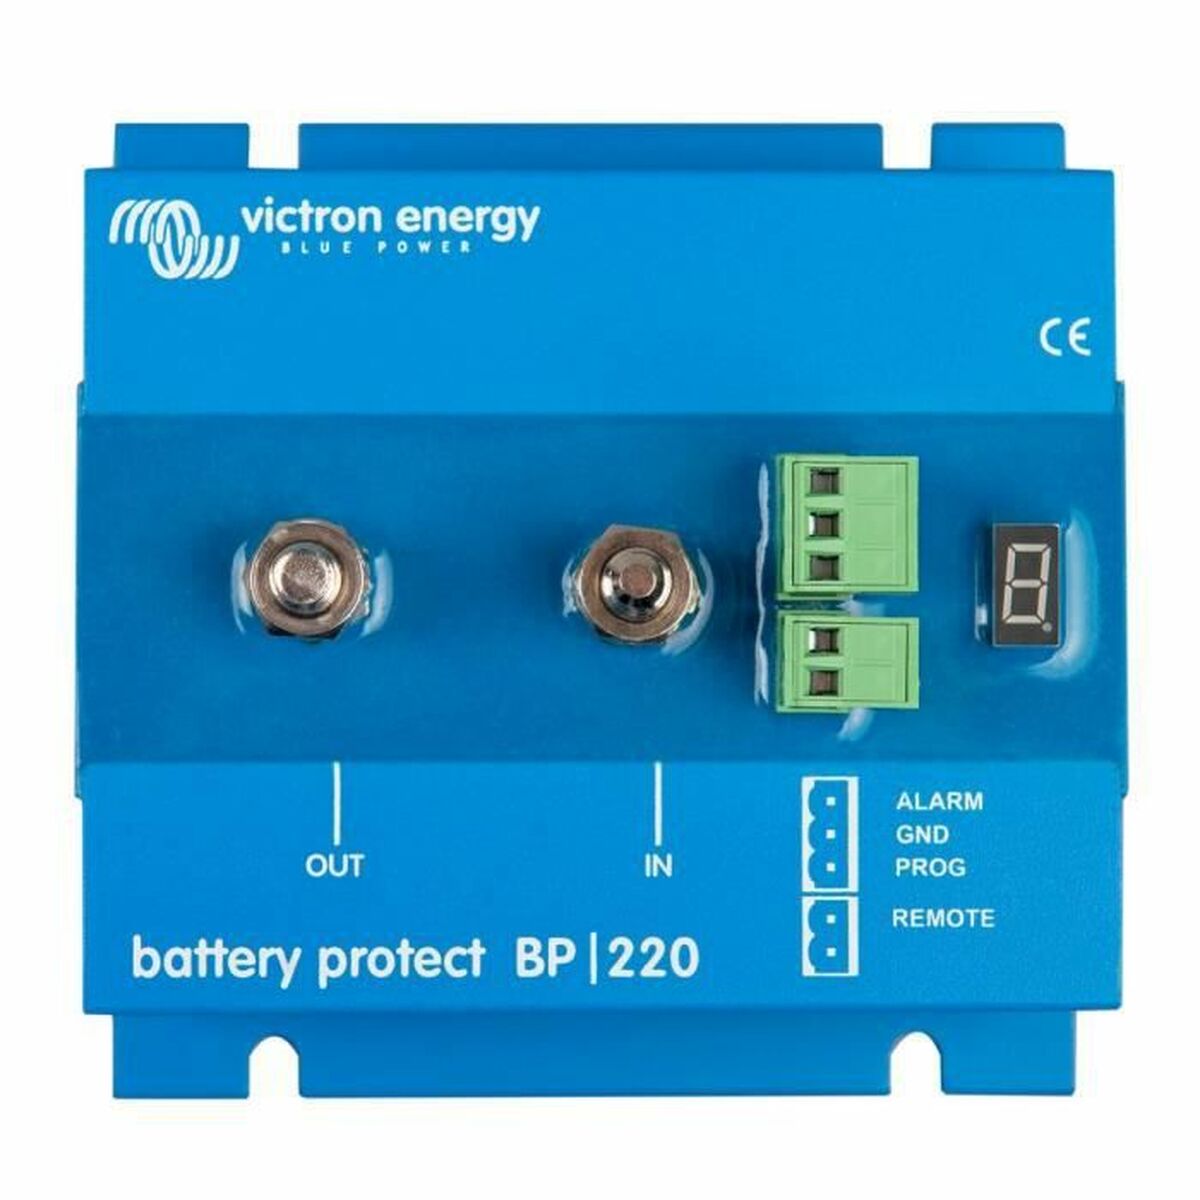 Hair Protecting Oil Victron Energy 12/24 V Battery 220 A